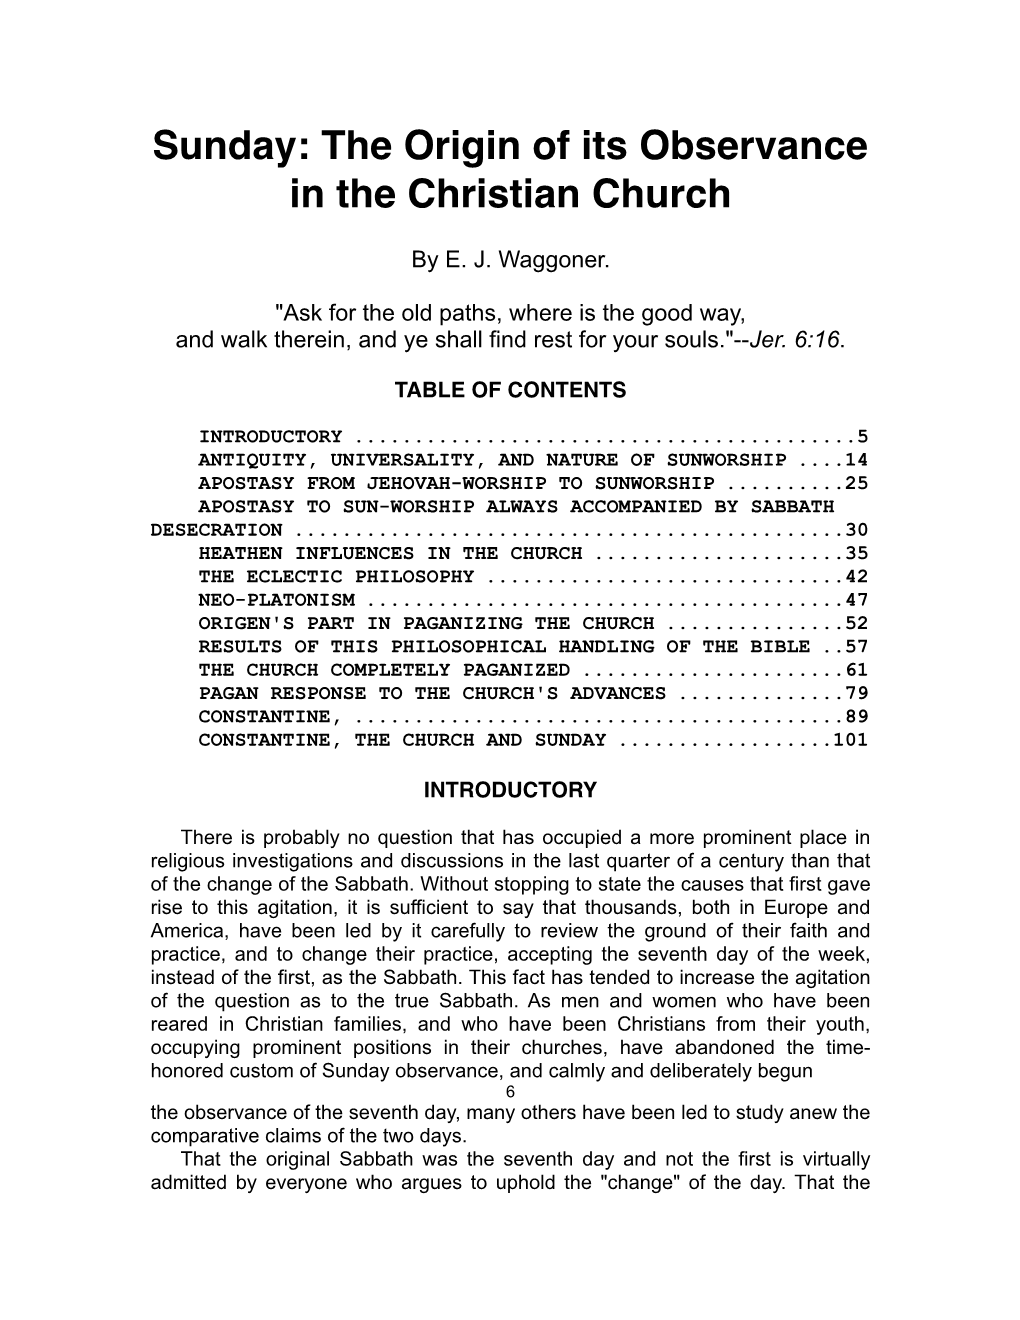 Sunday: the Origin of Its Observance in the Christian Church